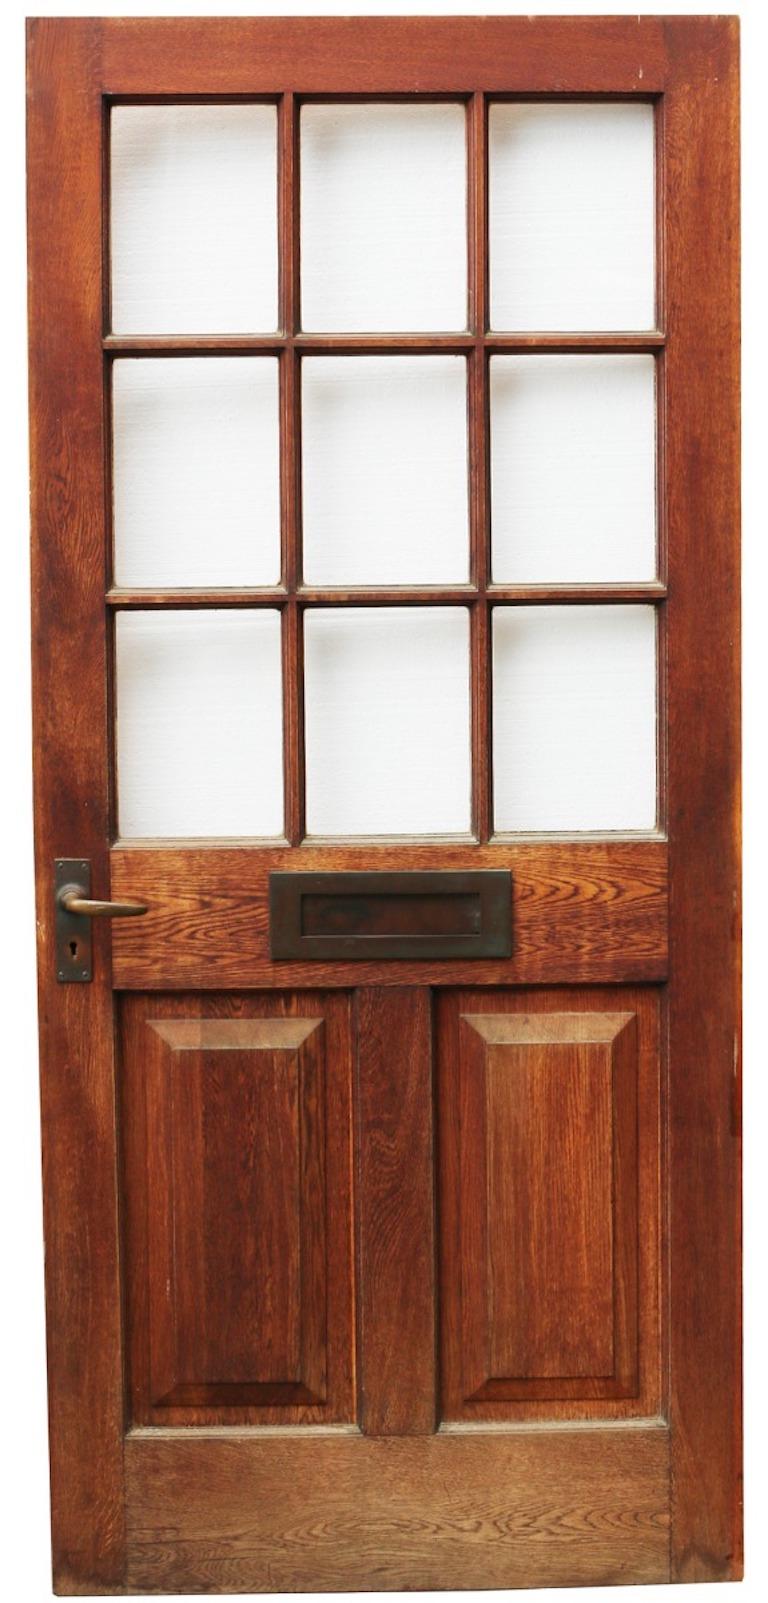 A large reclaimed Edwardian period oak front or exterior door fitted with glazing.